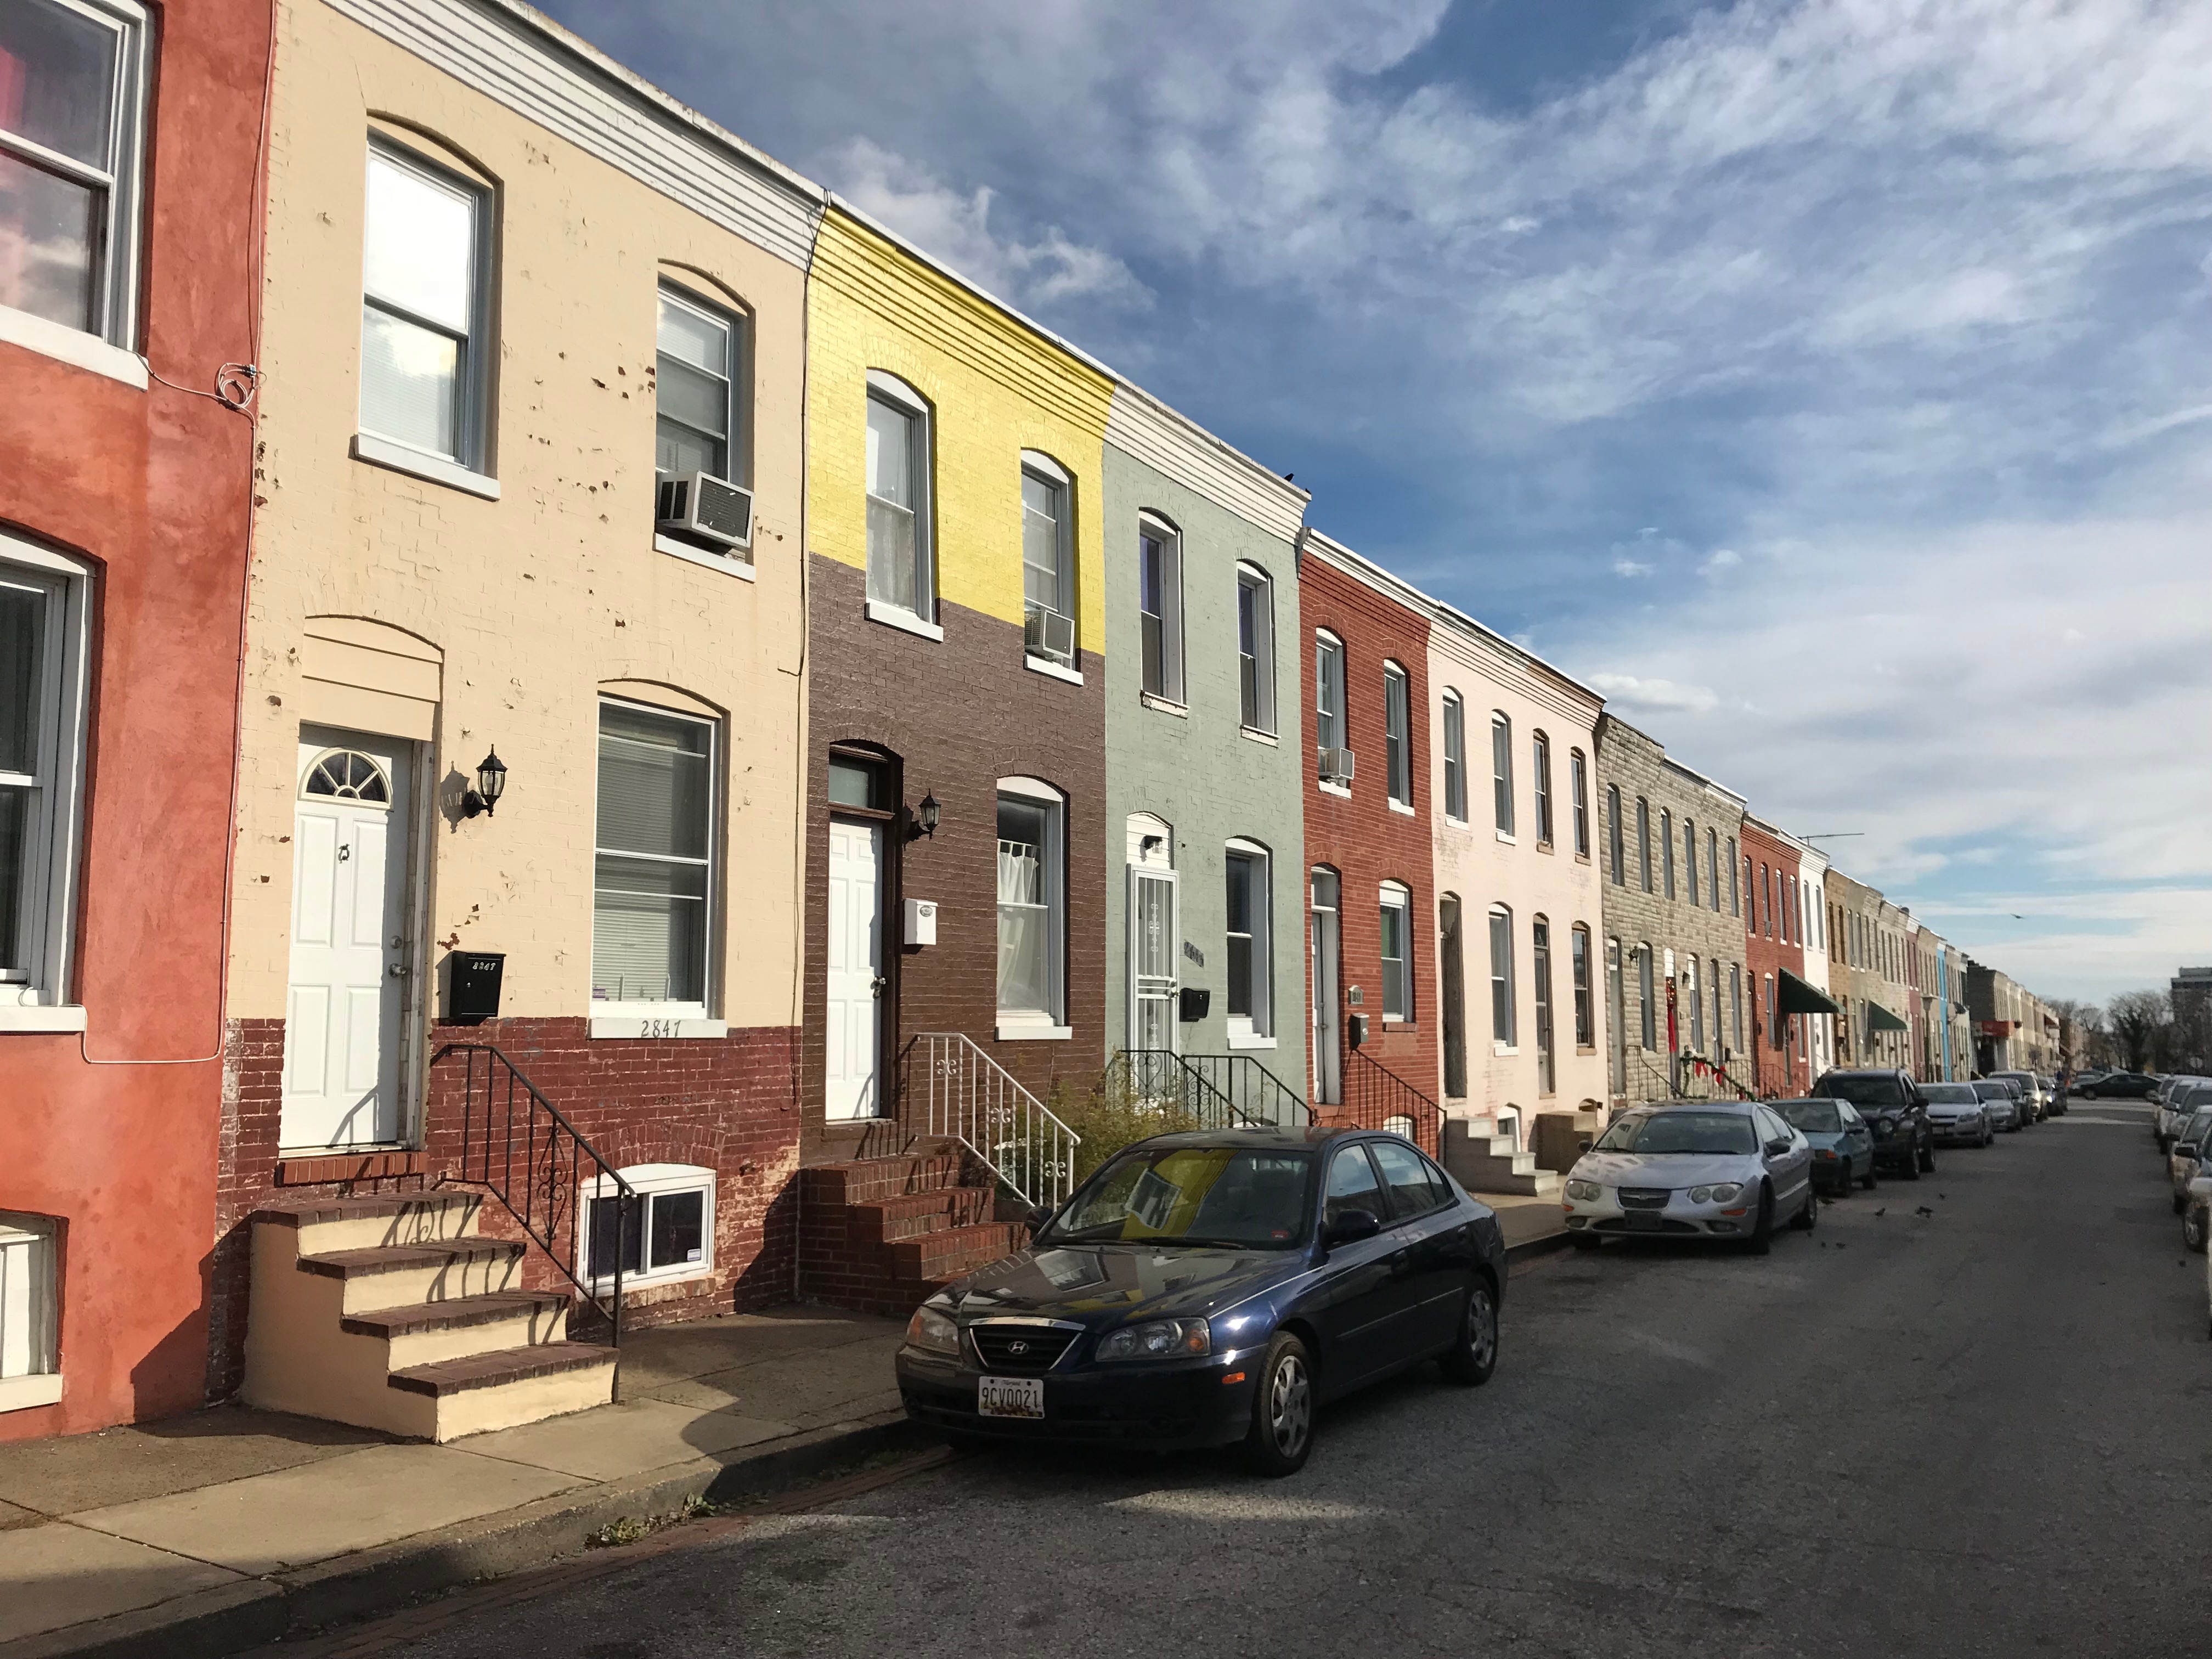 Rowhouses, 2800 block Miles Avenue (northeast side), Baltimore, MD 21211, Architecture, Baltimore, Building, Car, HQ Photo